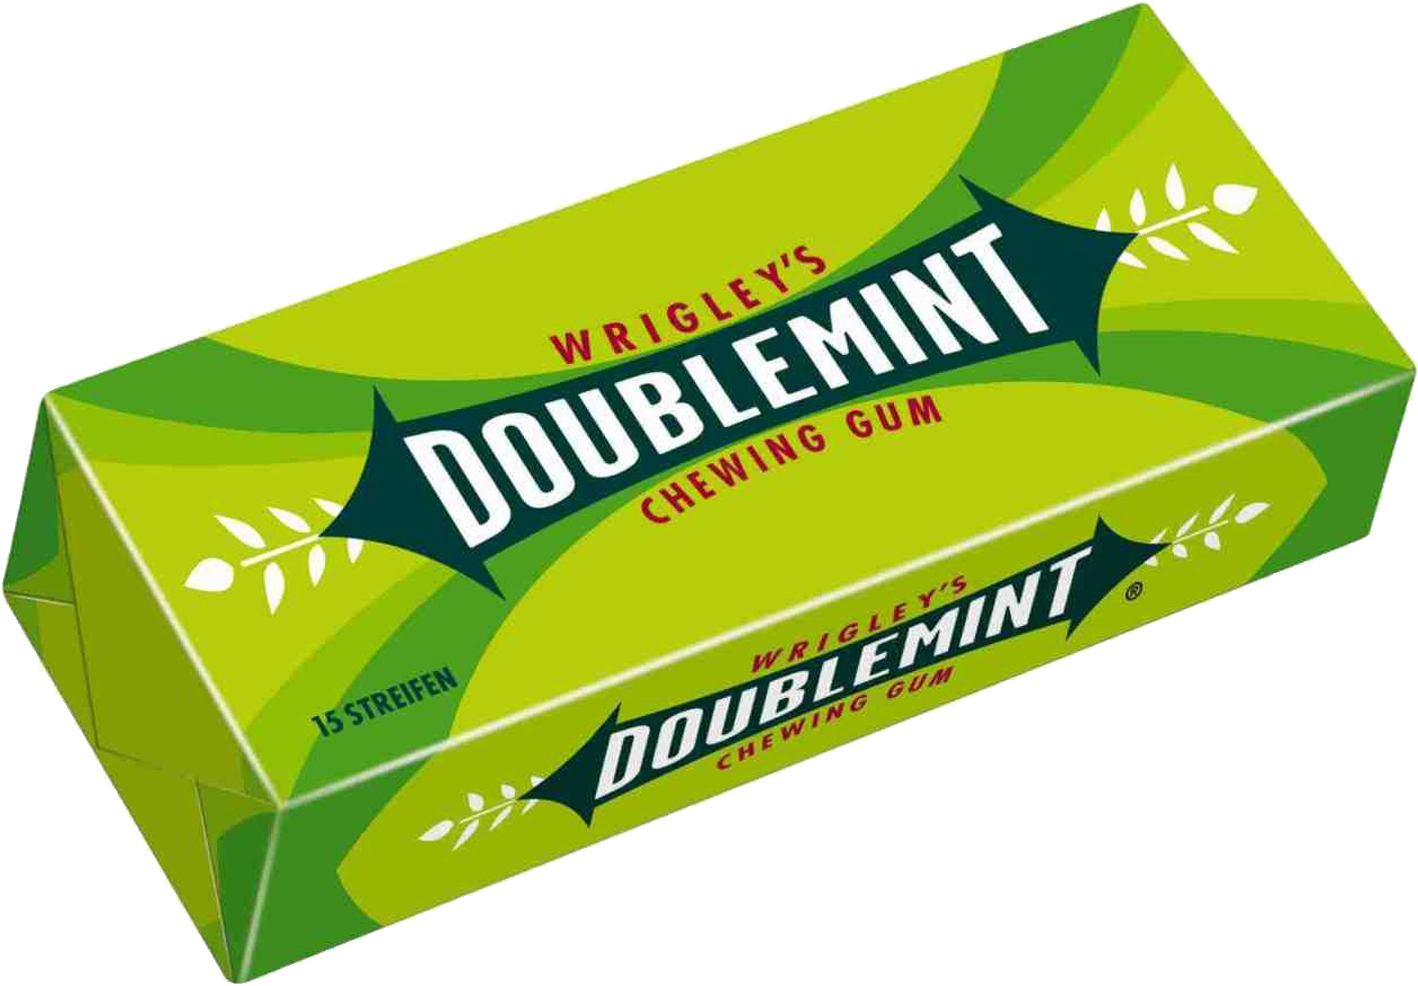 Chewing Gum Clipart Transparent Background - Wrigley's Doublemint Chewing Gum 15 Sticks (1418x986)